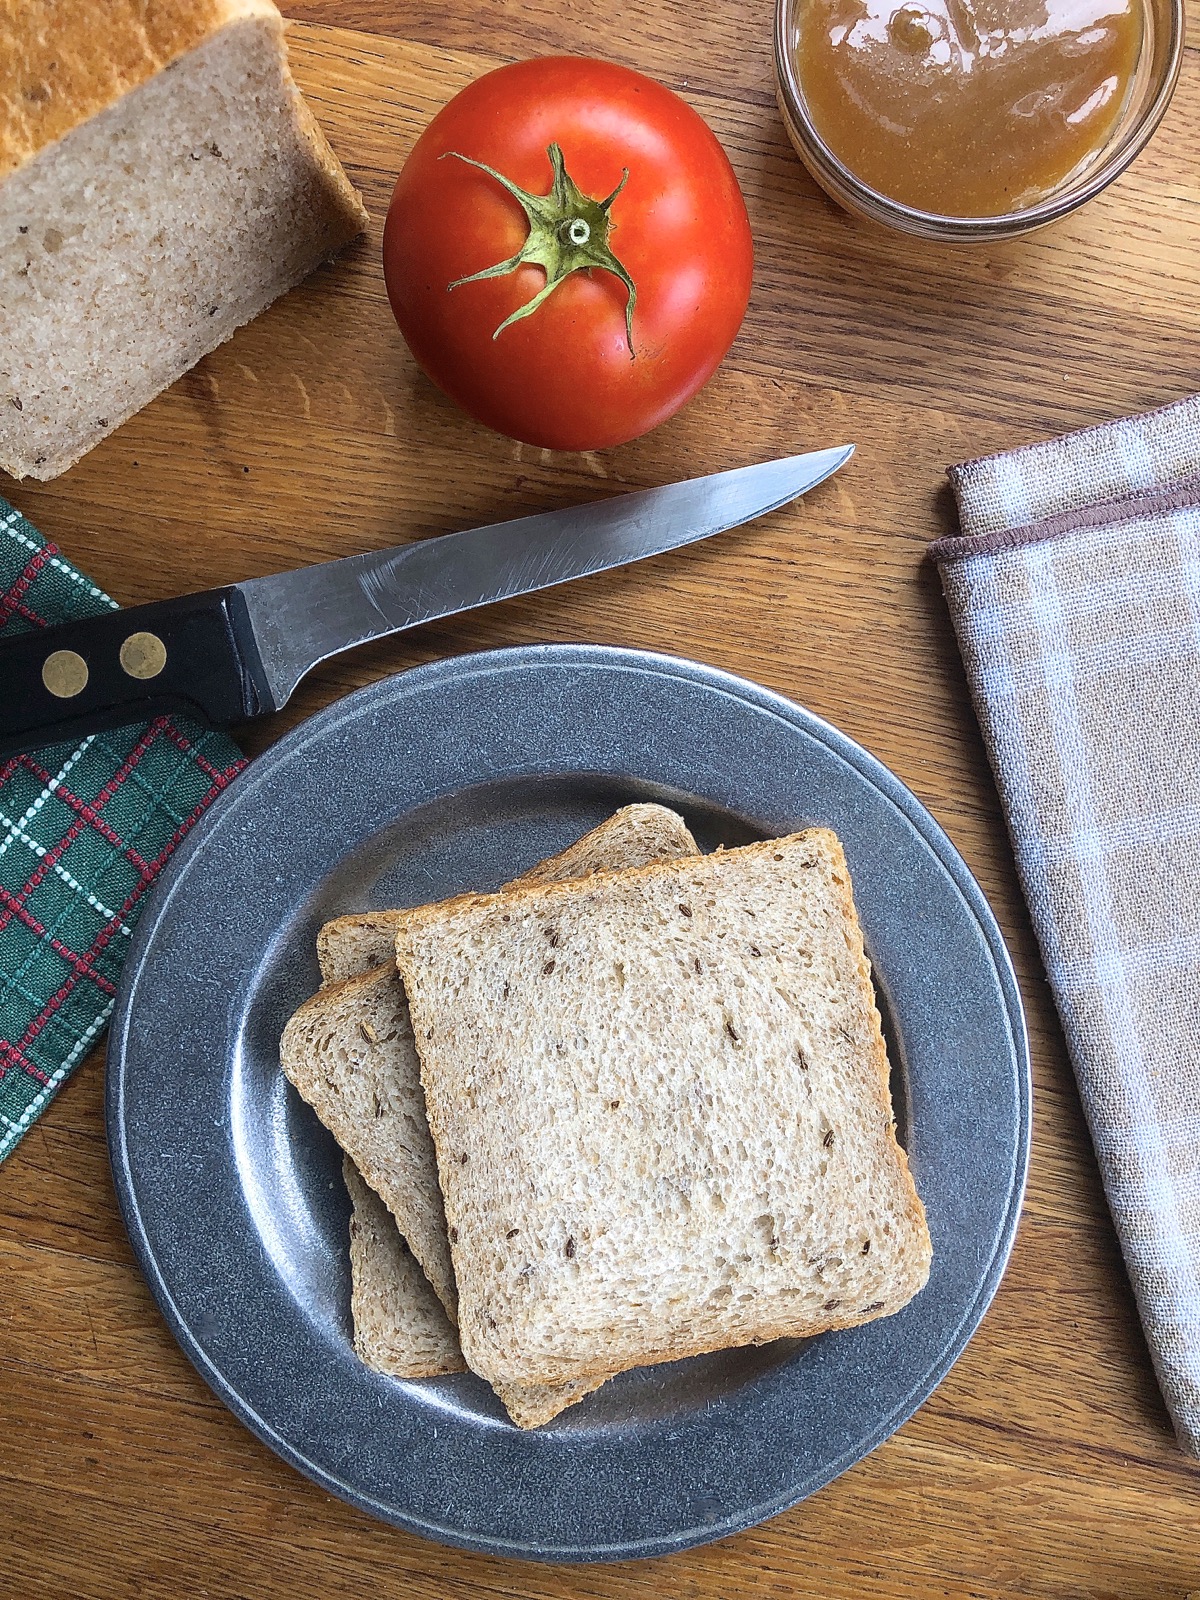 Sliced rye bread on a plate, ready to make into a sandwich.